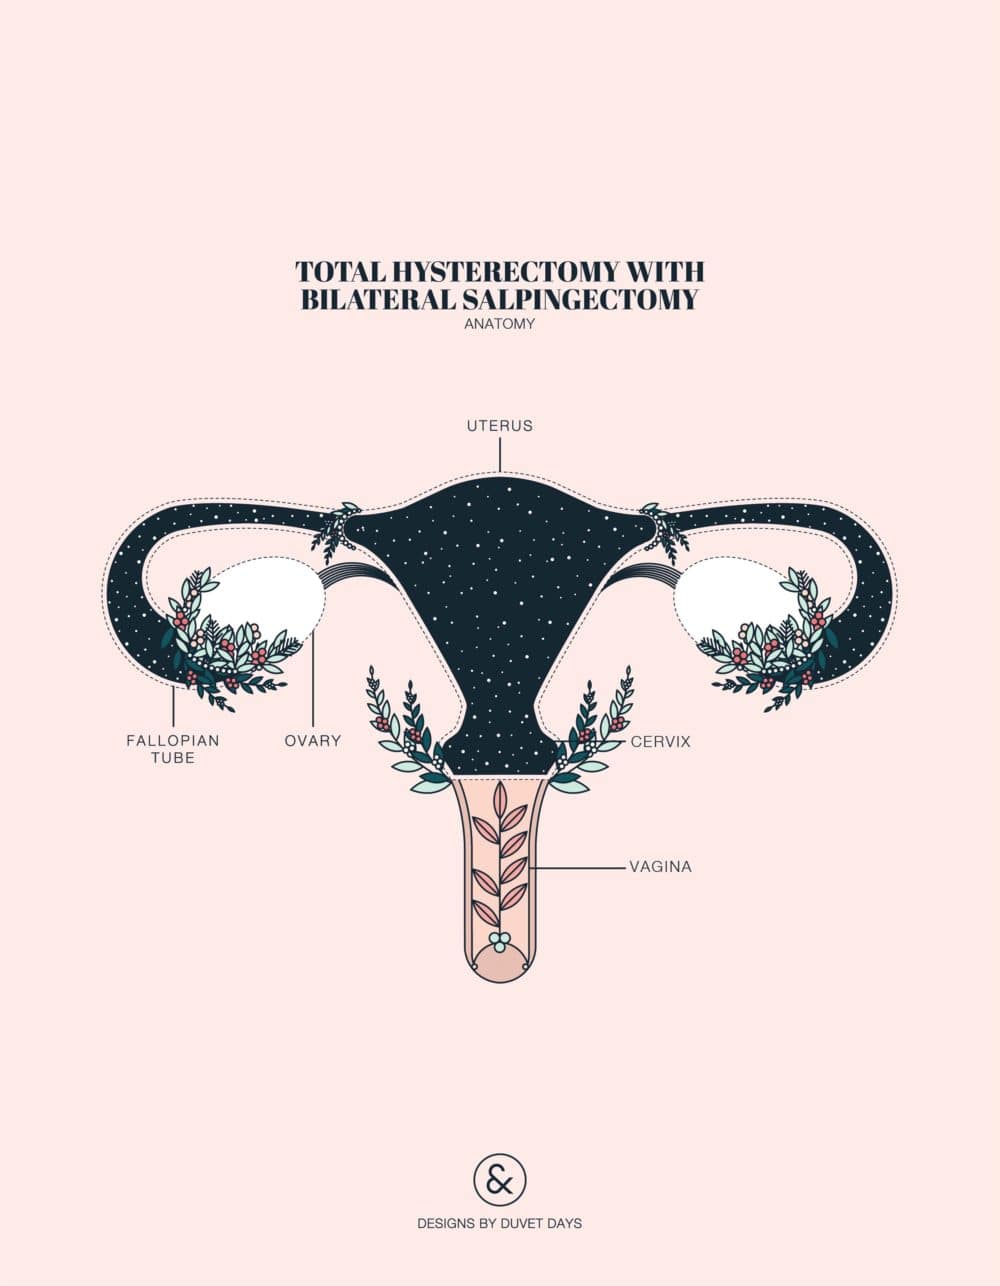 Duvet Days_Anatomy Illustrations_8.5x11_Hysterectomy Total with Bilateral Salpingectomy_Preview